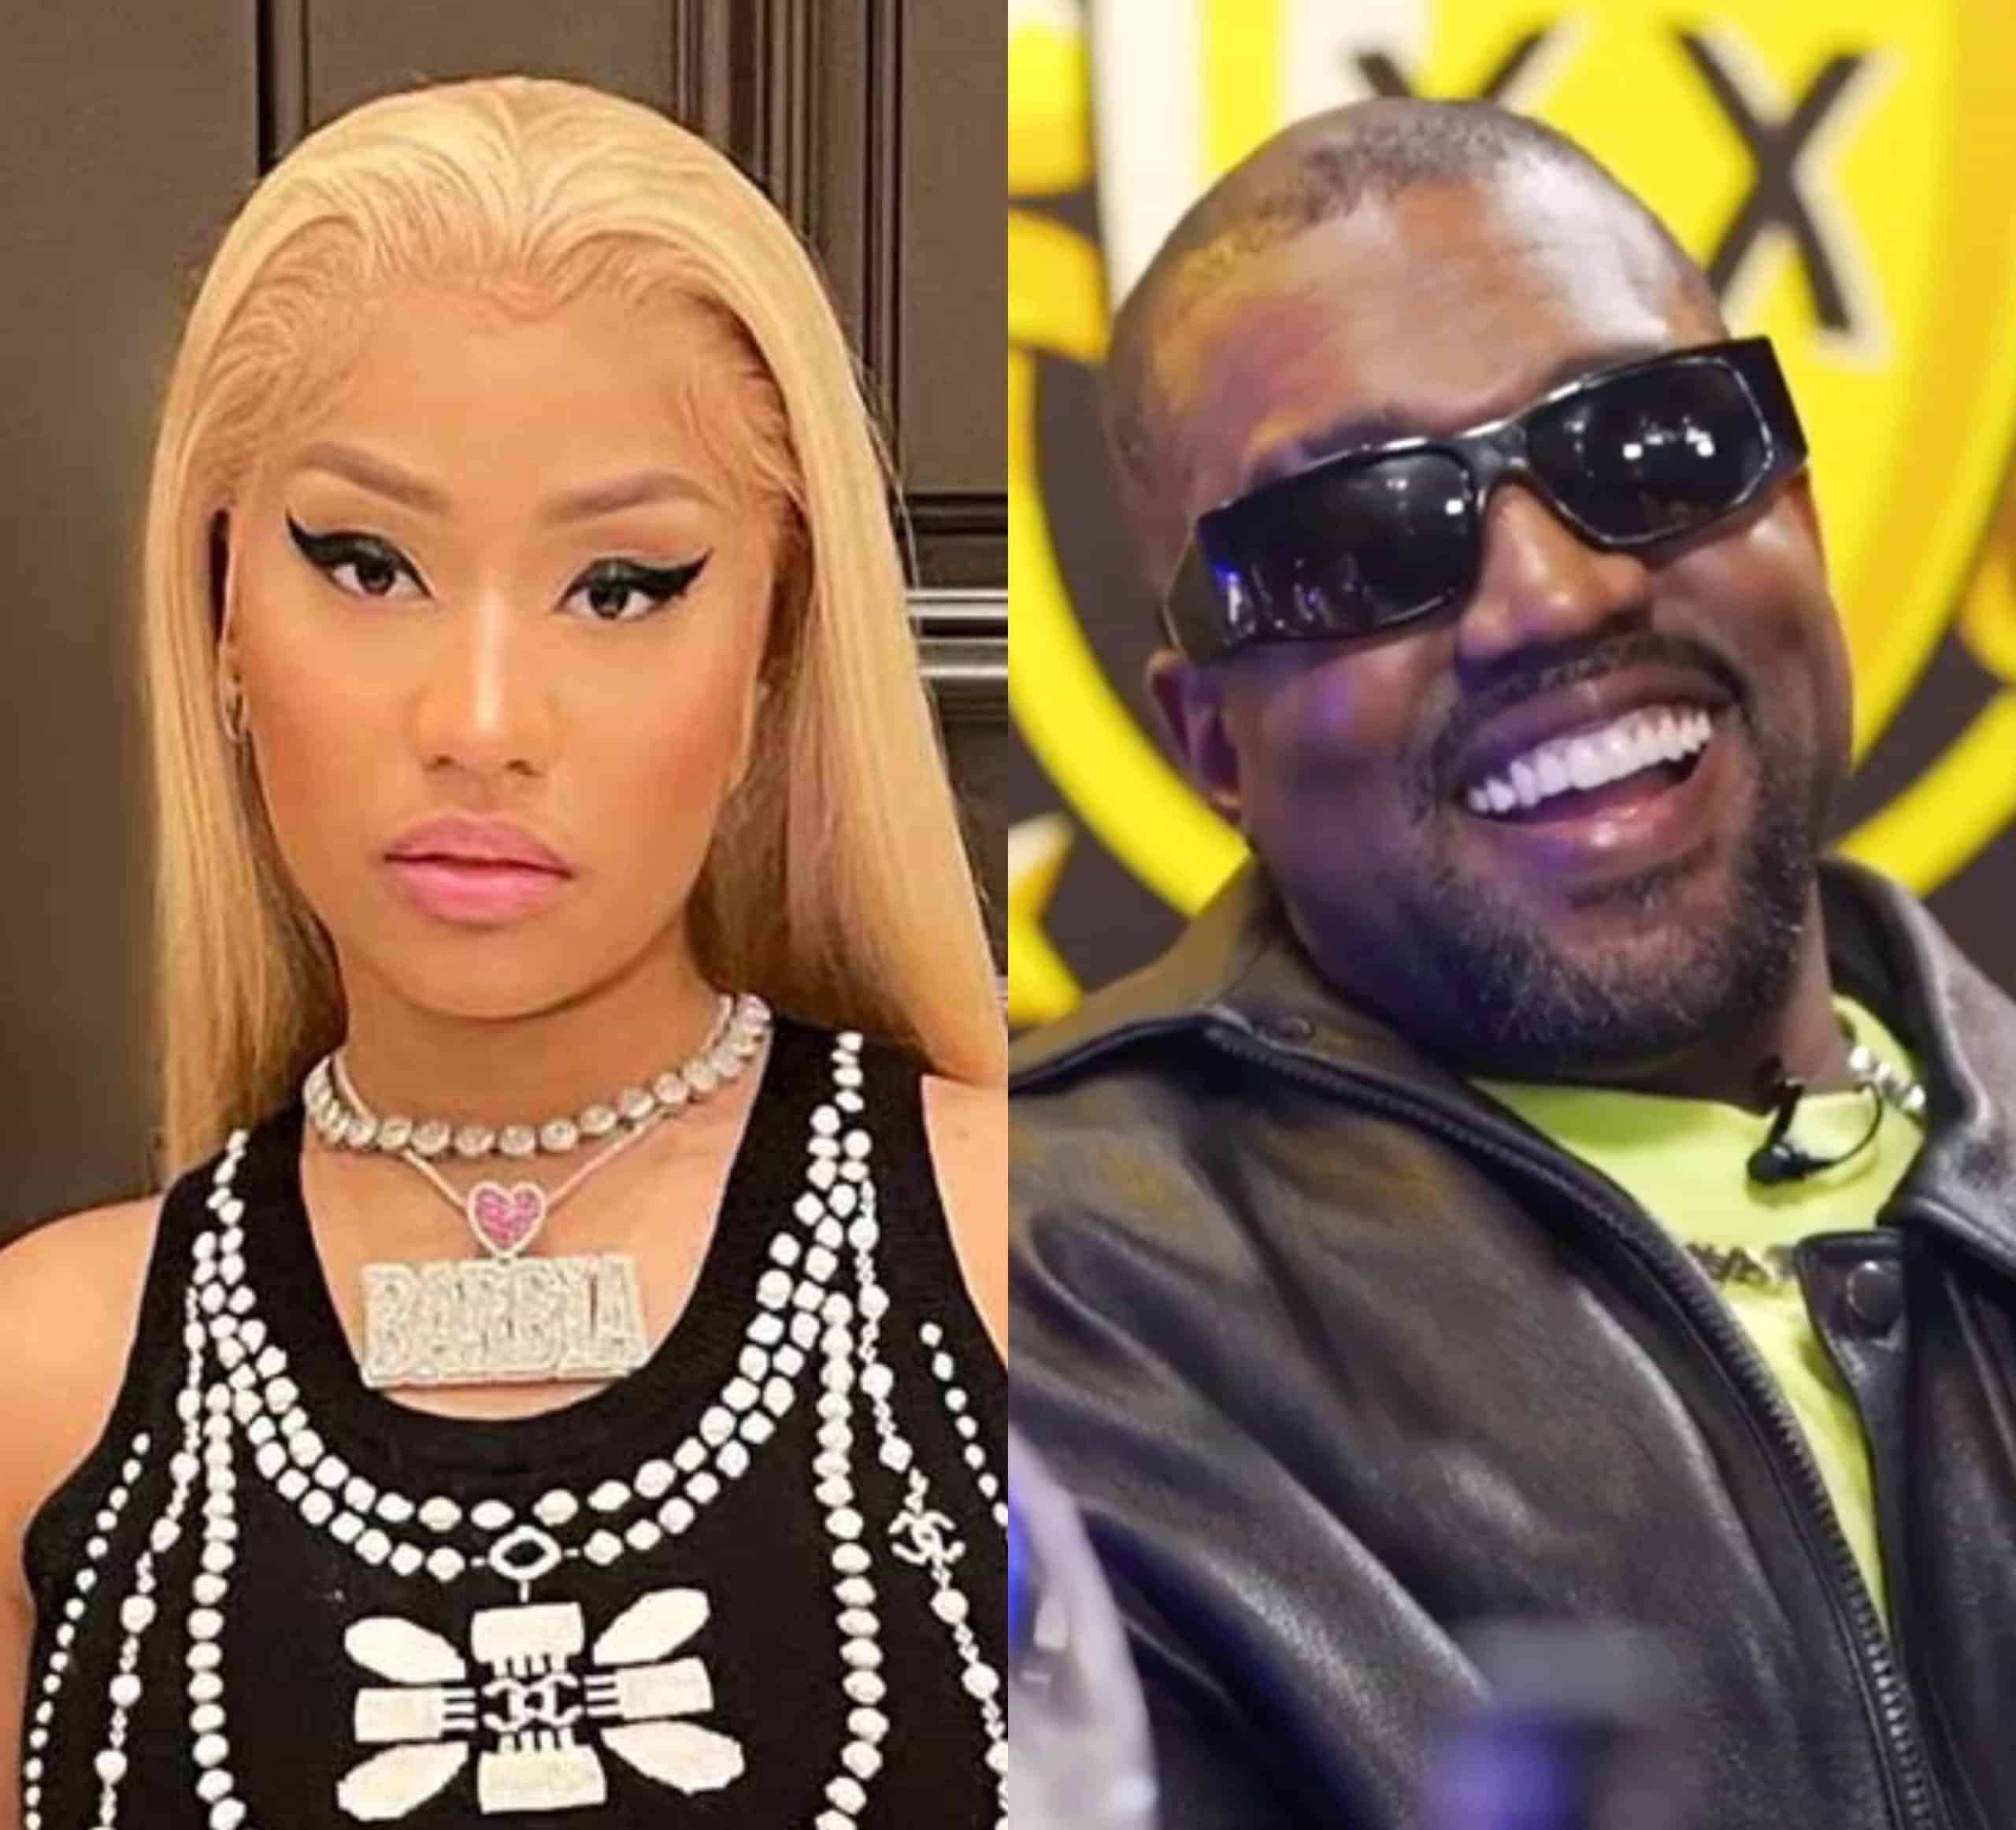 Nicki Minaj Reveals Kanye West Made Her Re-Do Her Verse 4 Times For A Song That Never Released